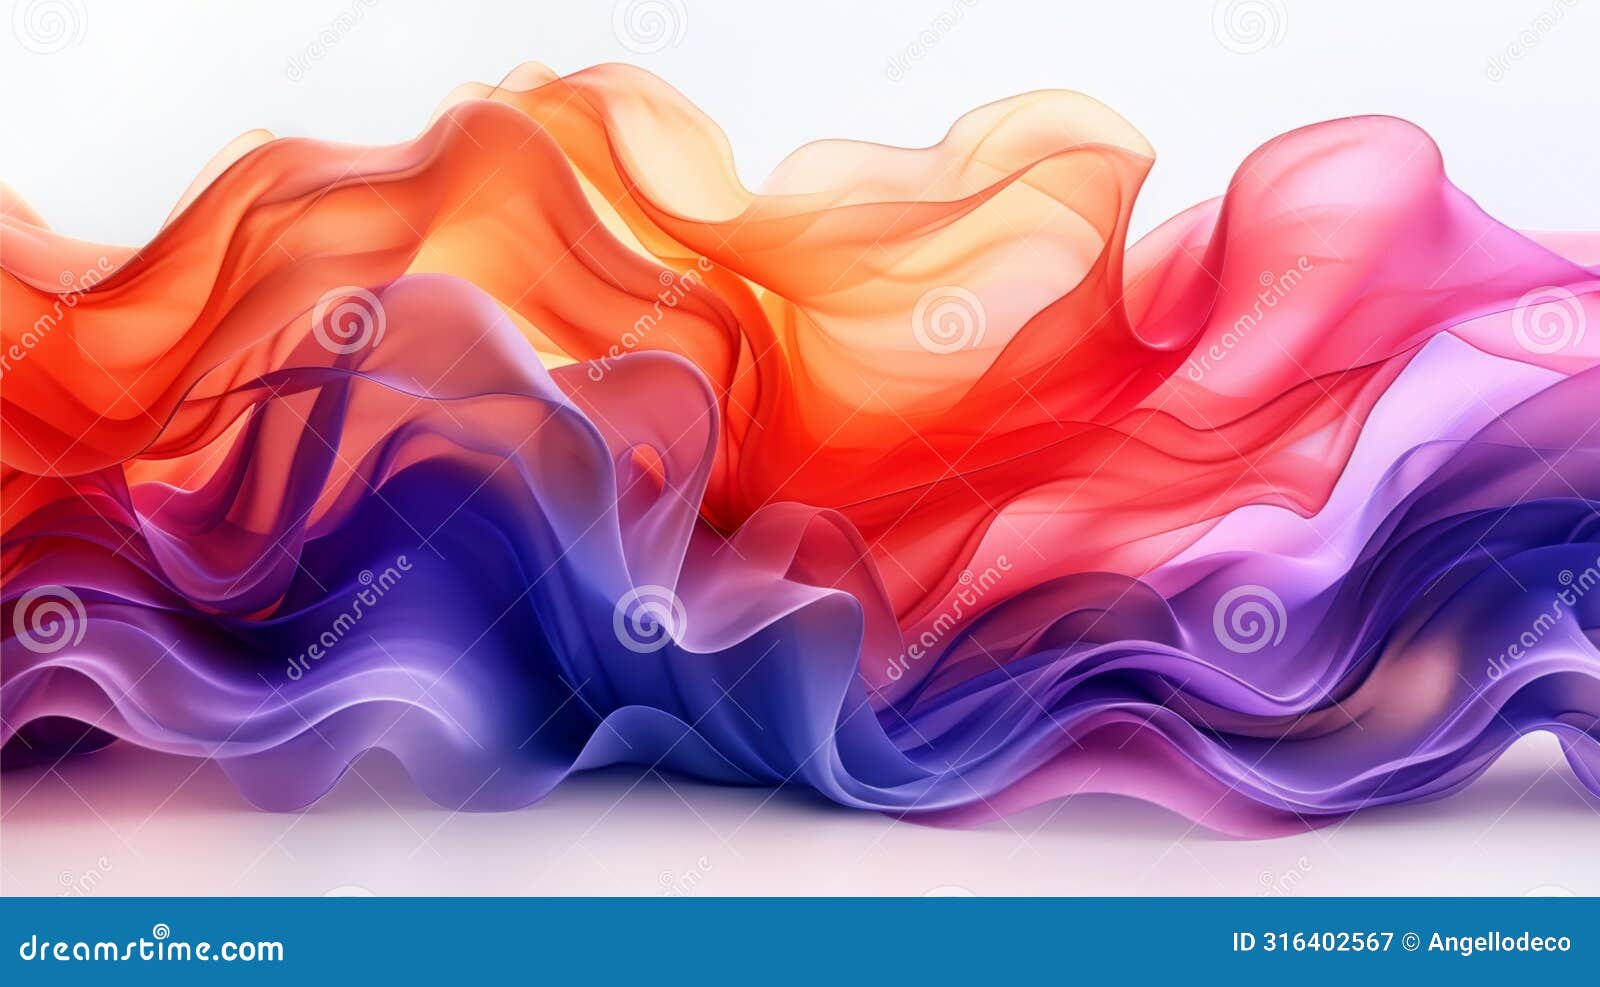 soft abstract ripples in pastel hues of silken fabrics waves of color background